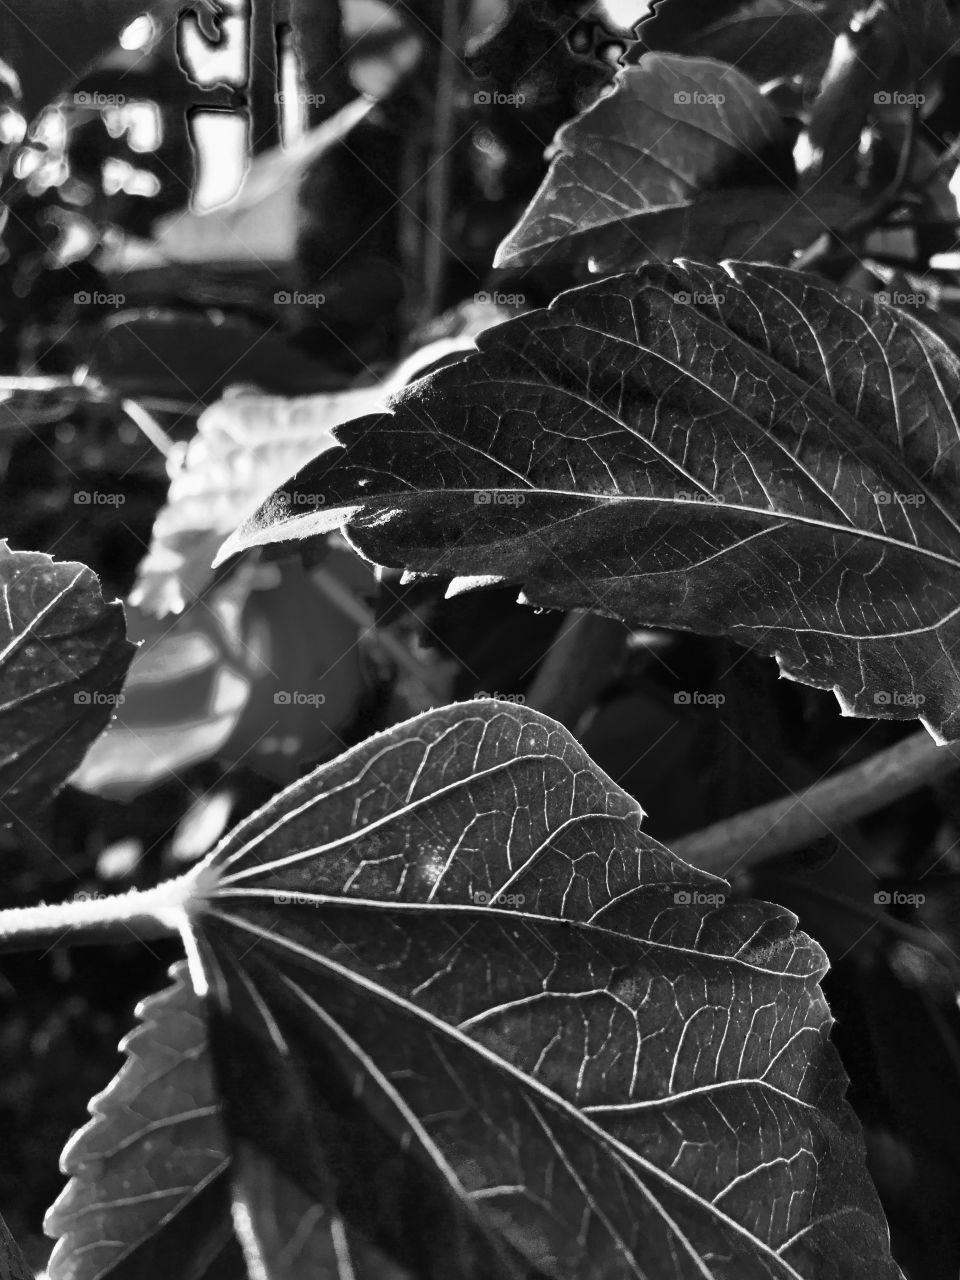 Sunset at vineyard in Temecula - Red flower with green leaves illuminated by sun. Black and white photo. 